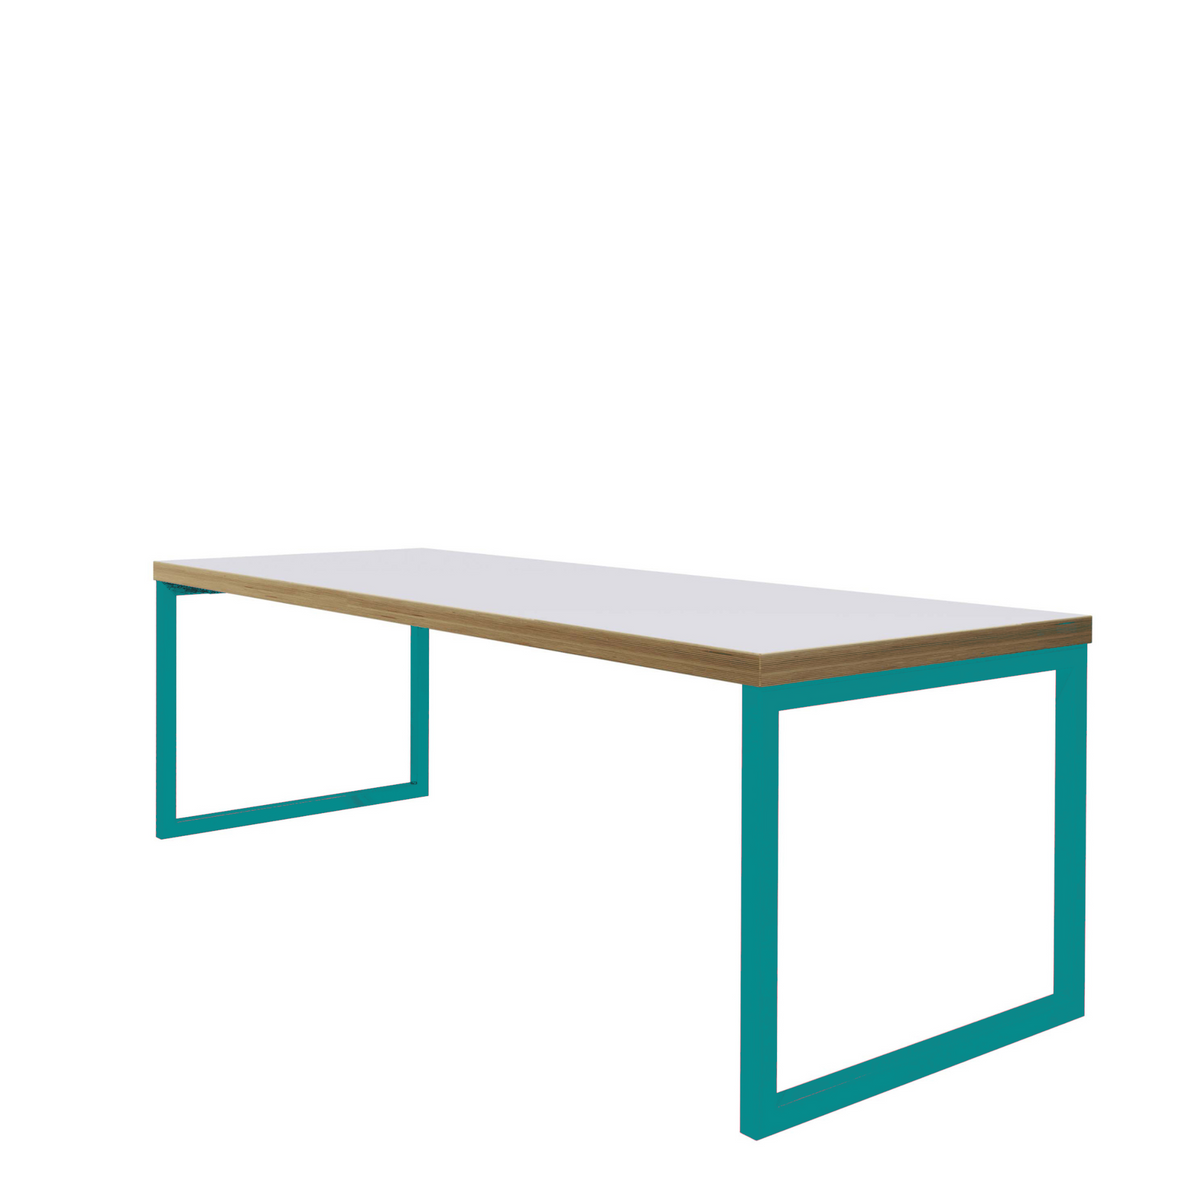 ORN Axiom Café Bench Table White with Turquoise Blue 5018 Frame